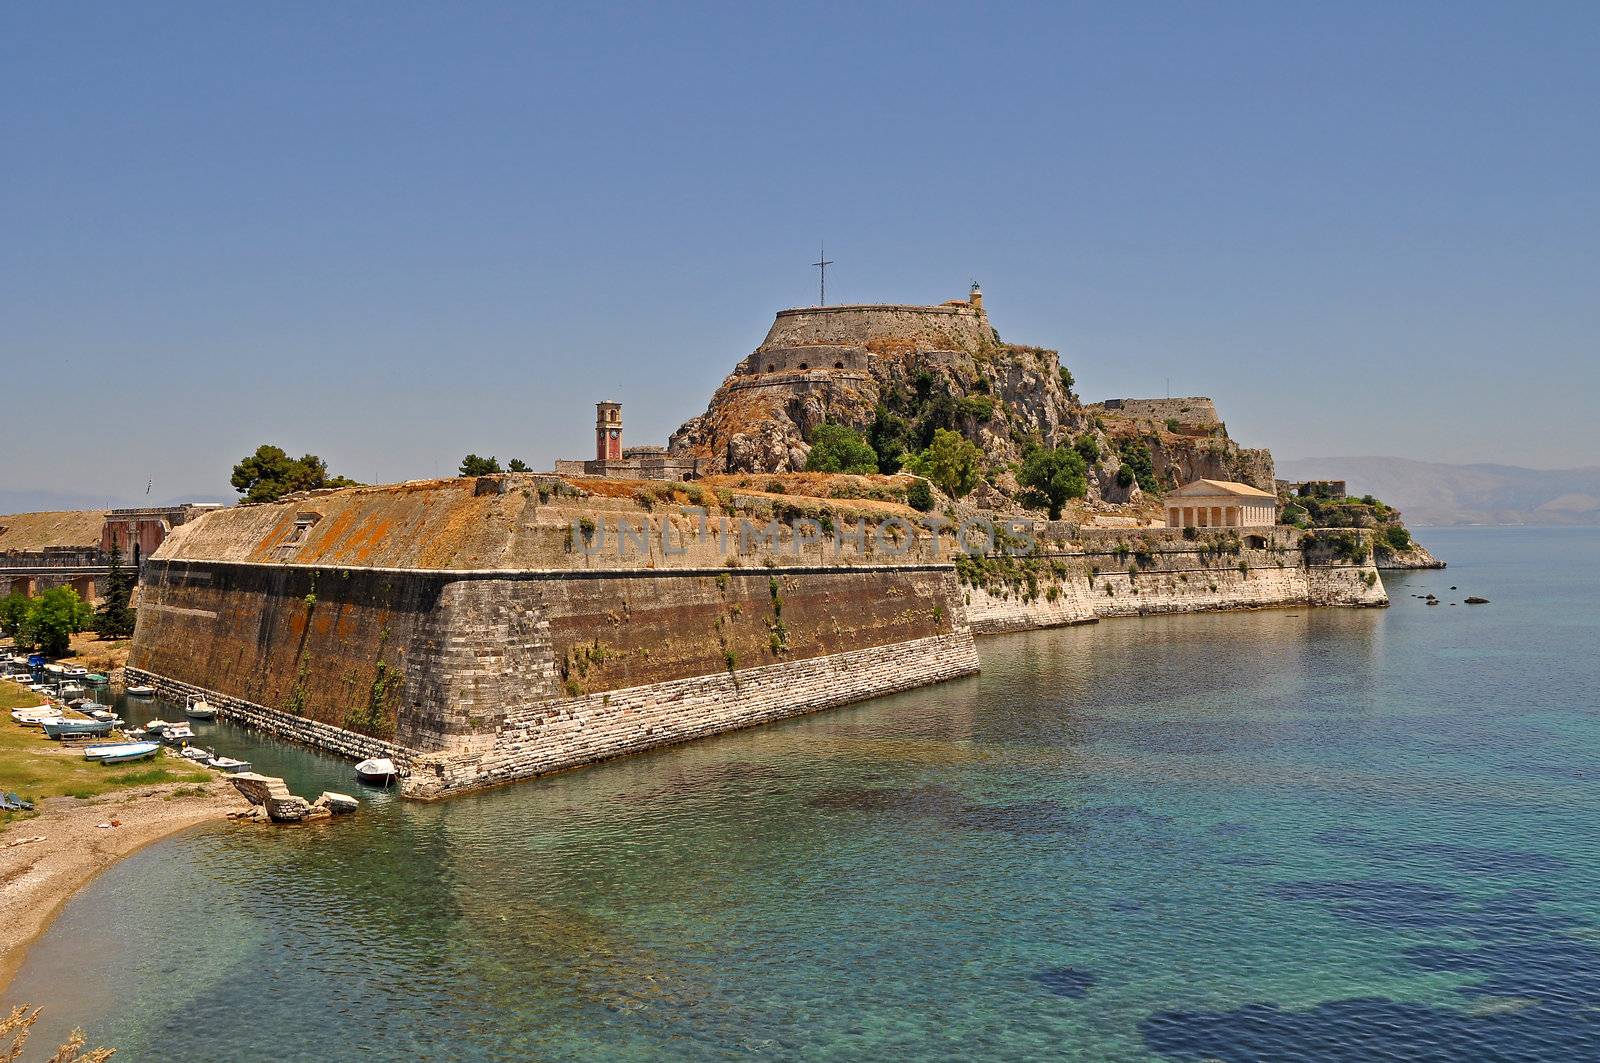 The old fortress in Corfu town, Greece.